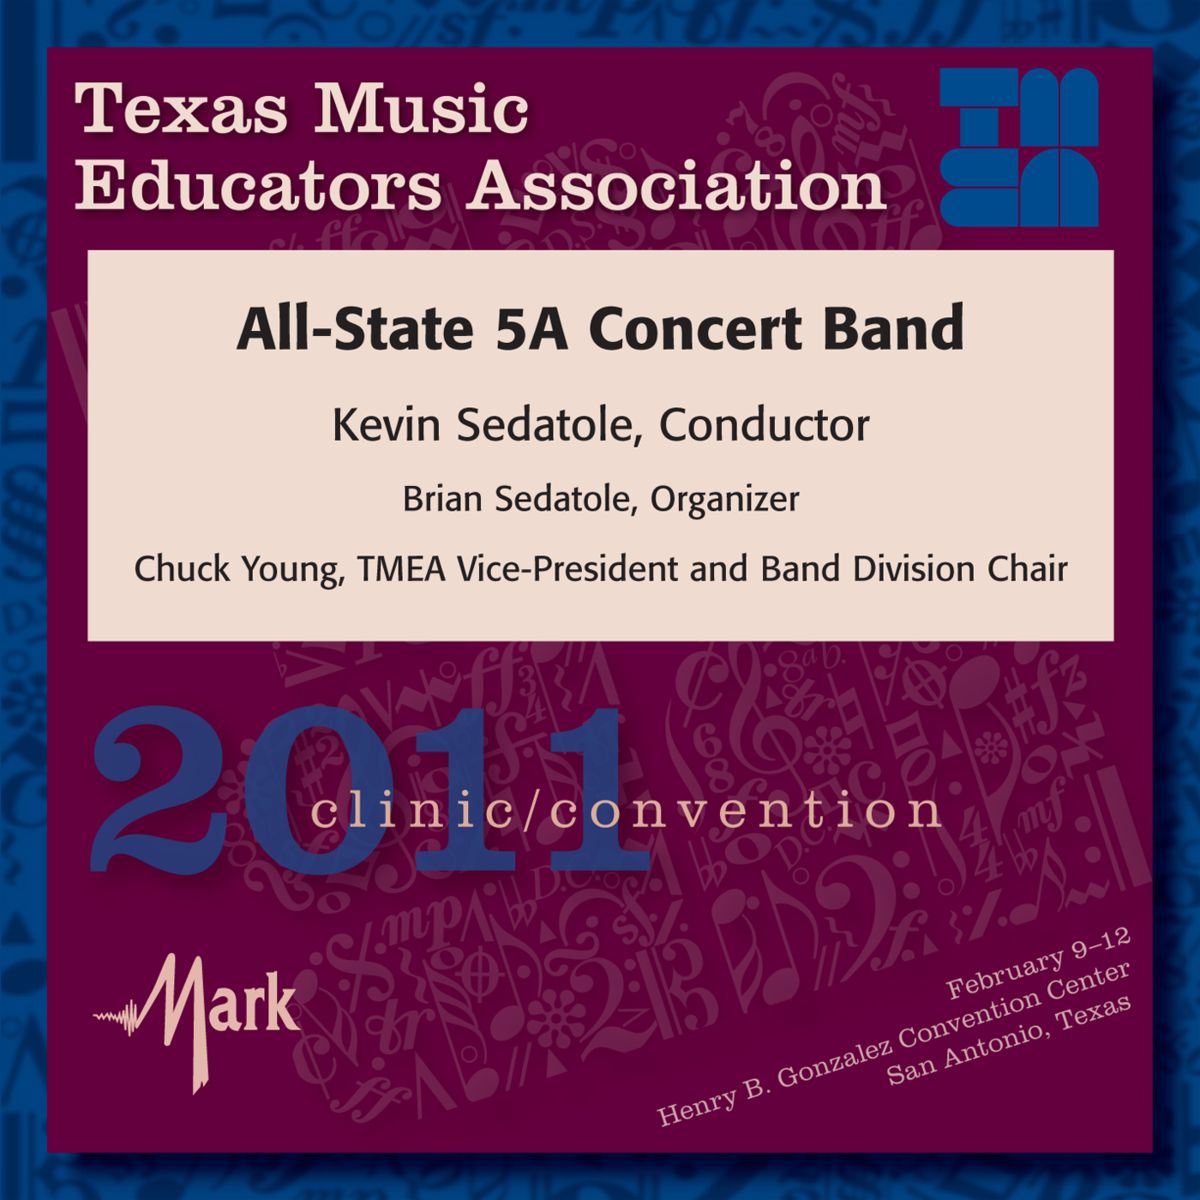 2011 Texas Music Educators Association: All-State 5A Concert Band - click here